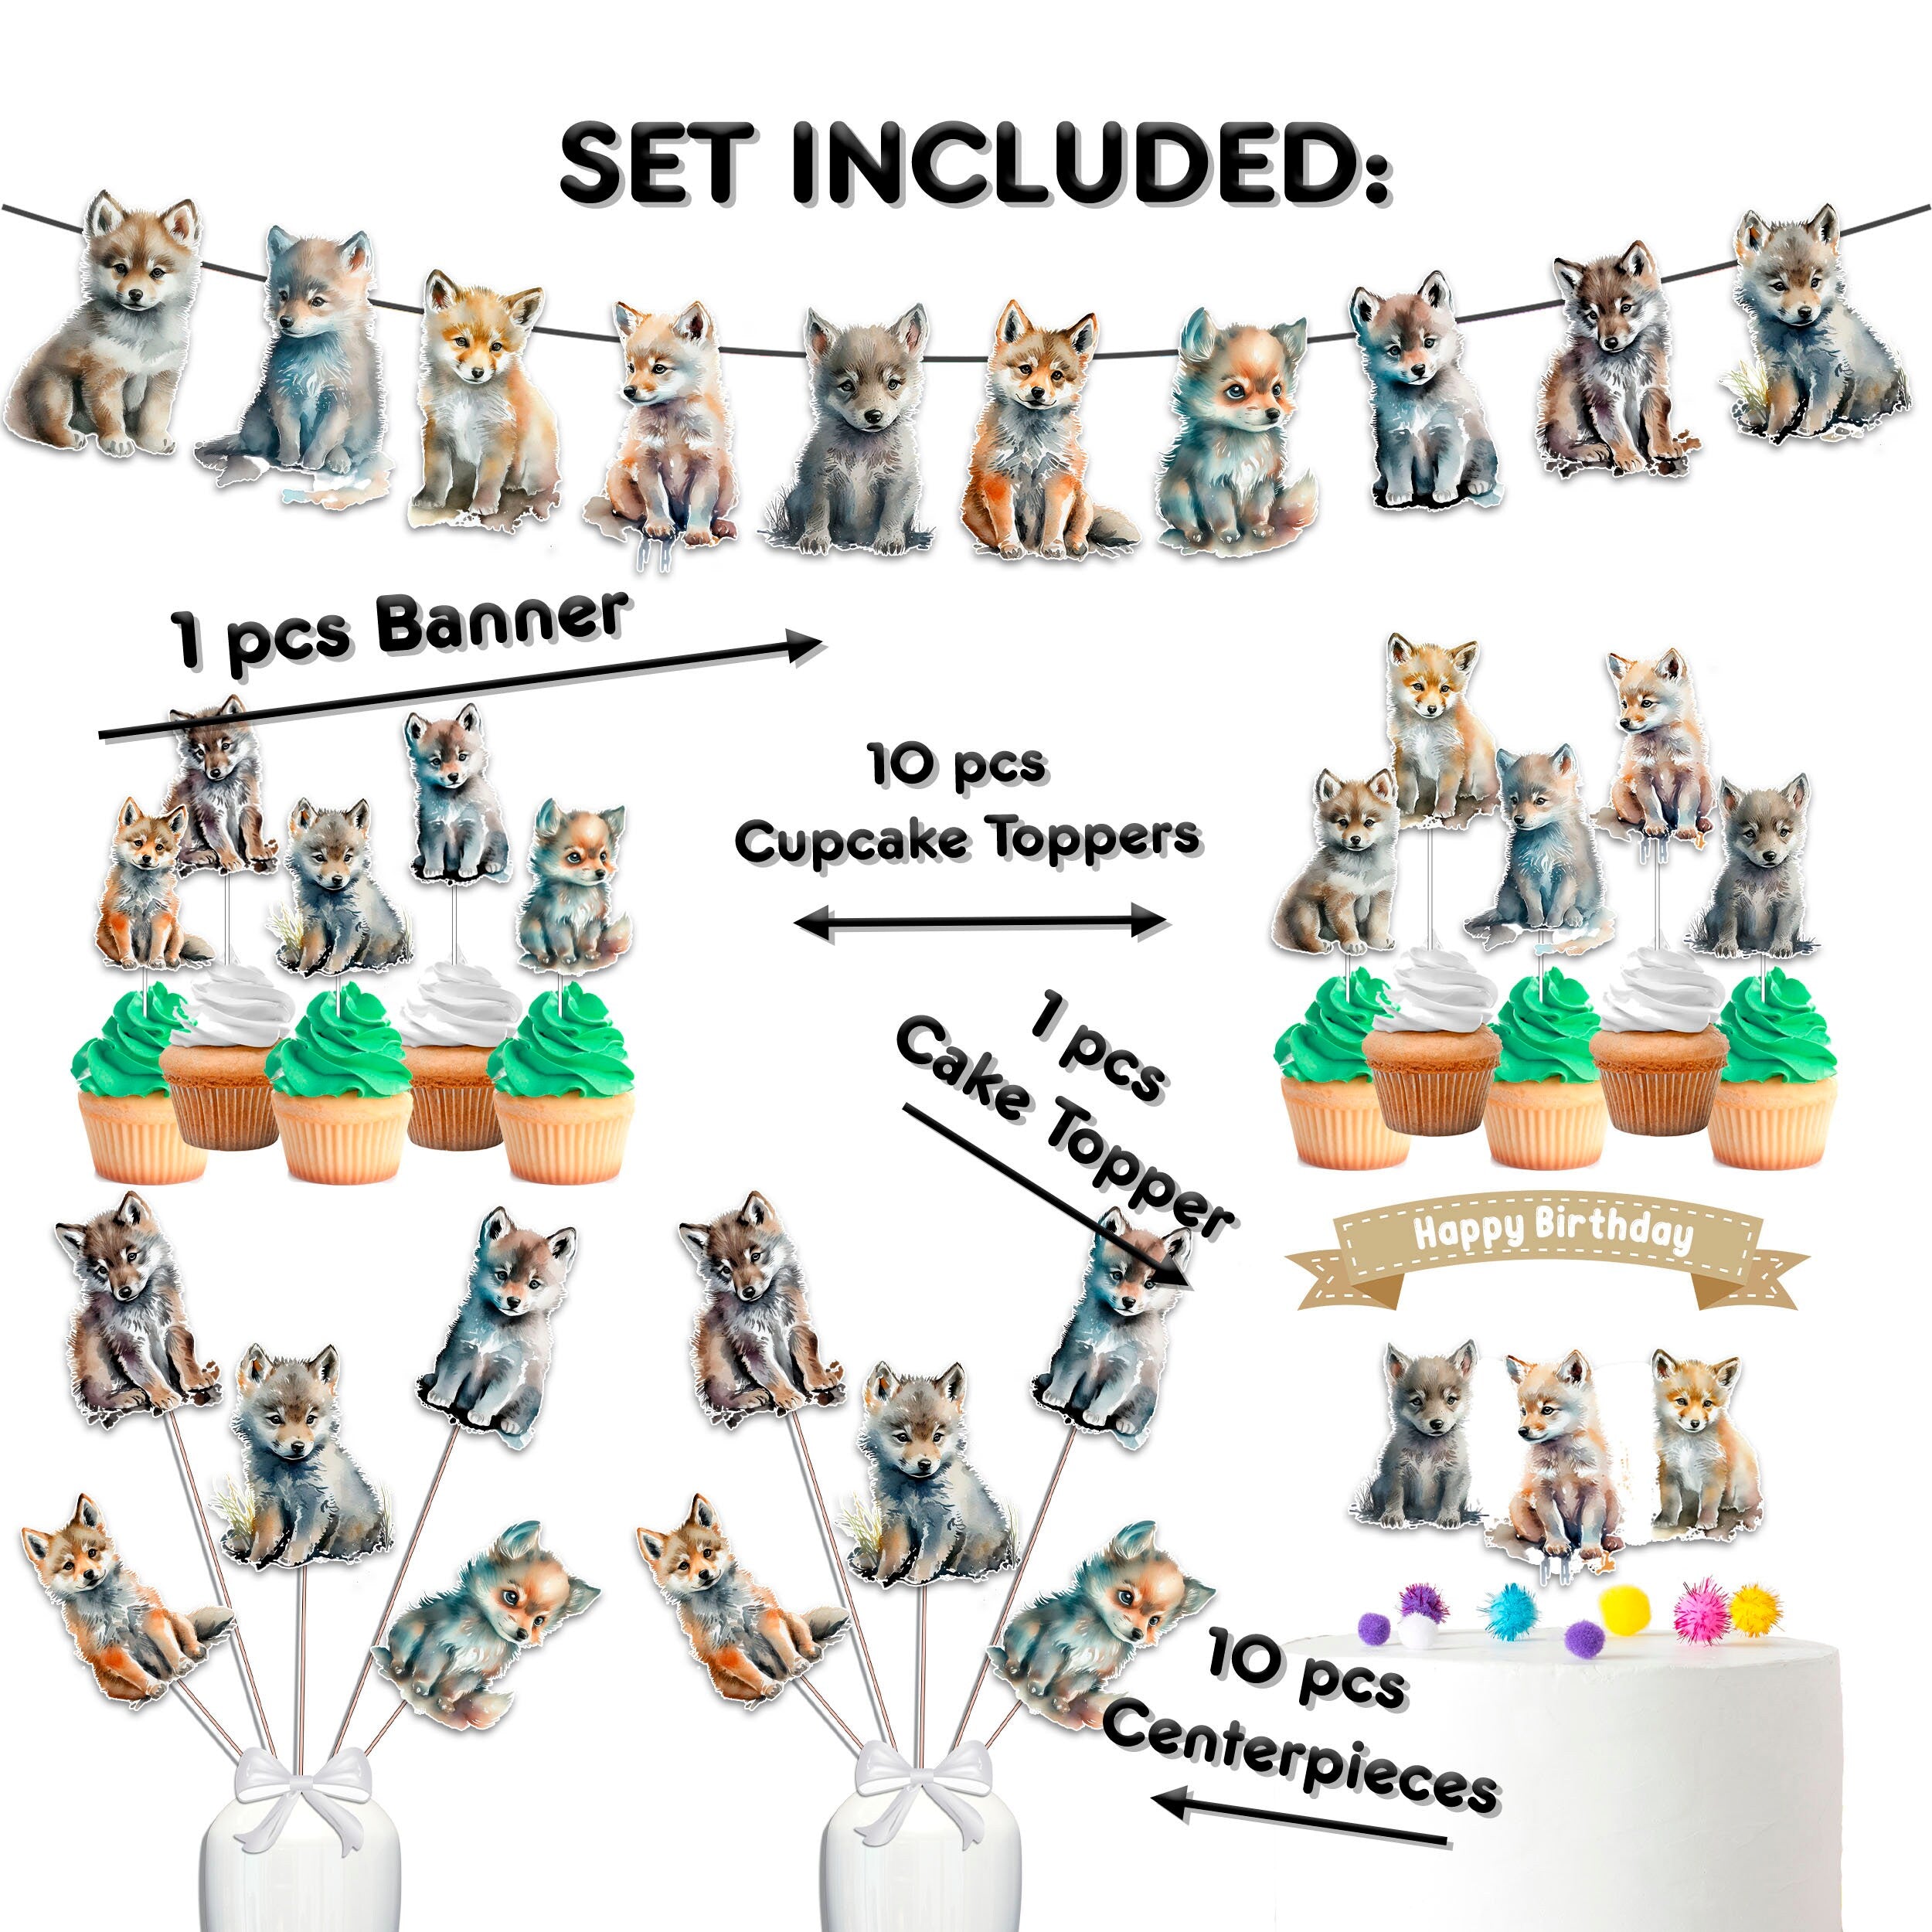 Wildly Cute Wolf Themed Party Decor Set  - Ideal for Baby Showers & Birthdays with Cake Topper, Cupcake Toppers, Centerpieces & Banner